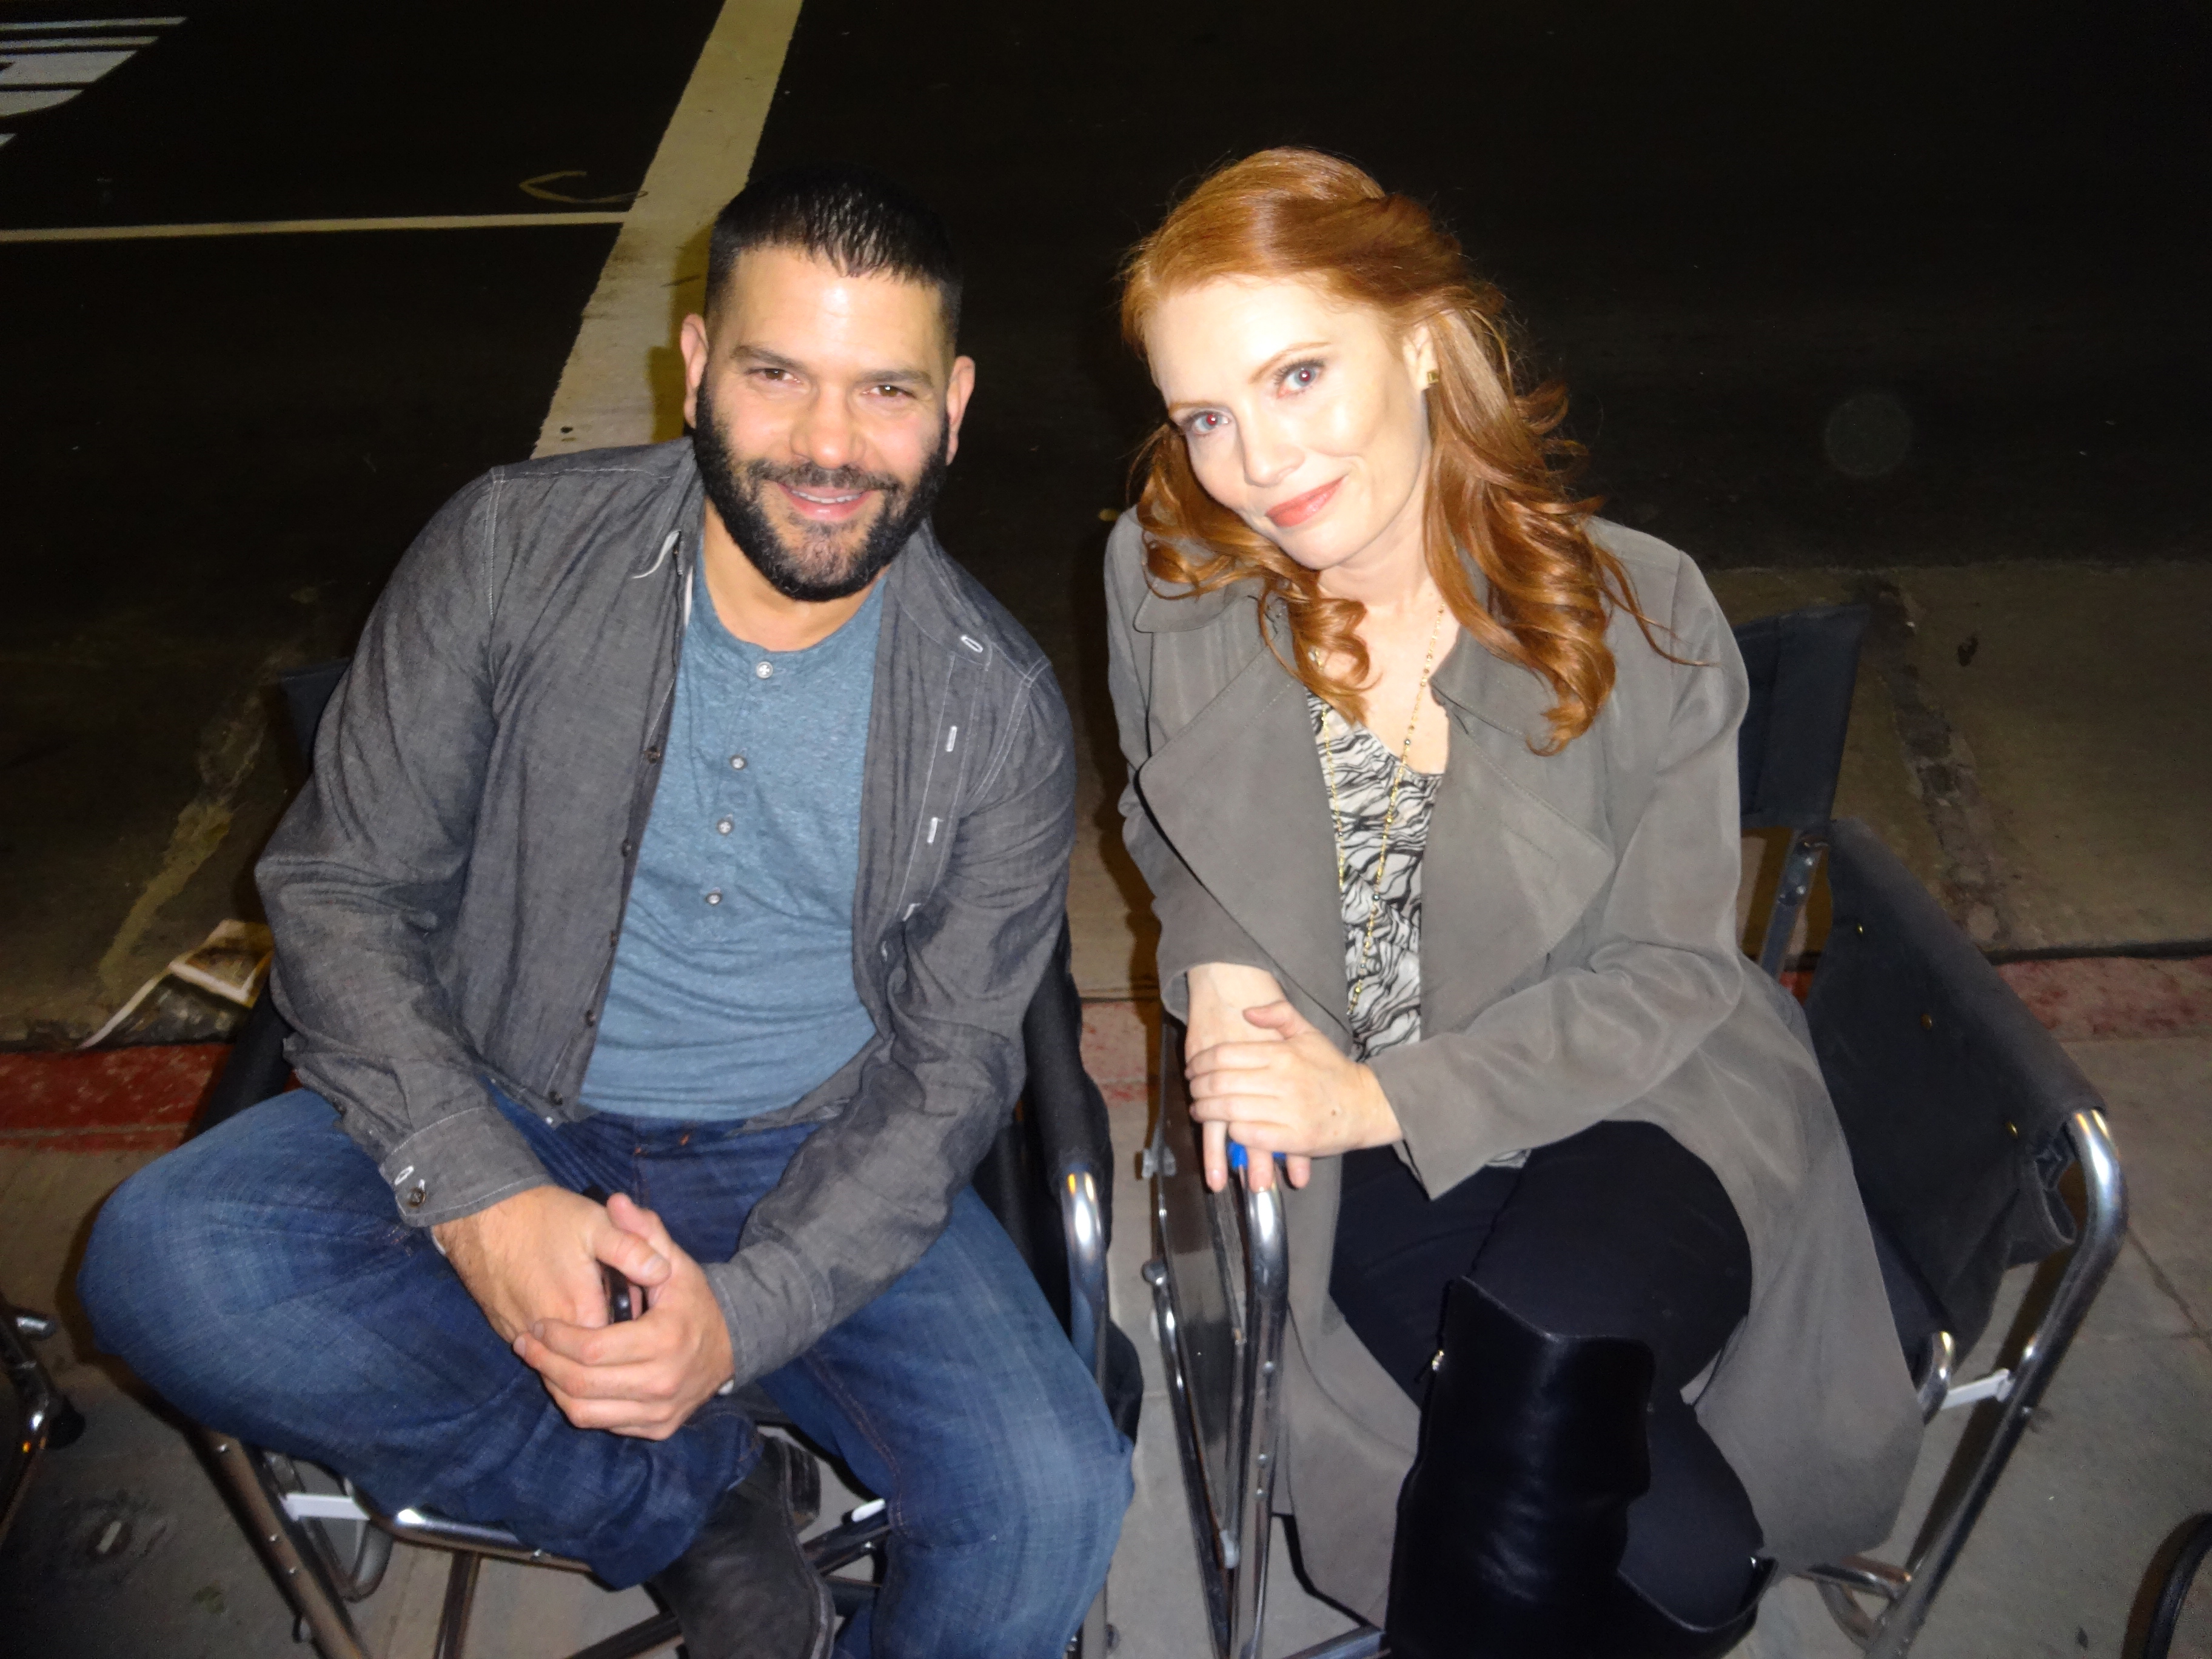 Kimberly Crandall and Guillermo Diaz on-set of ABC's SCANDAL